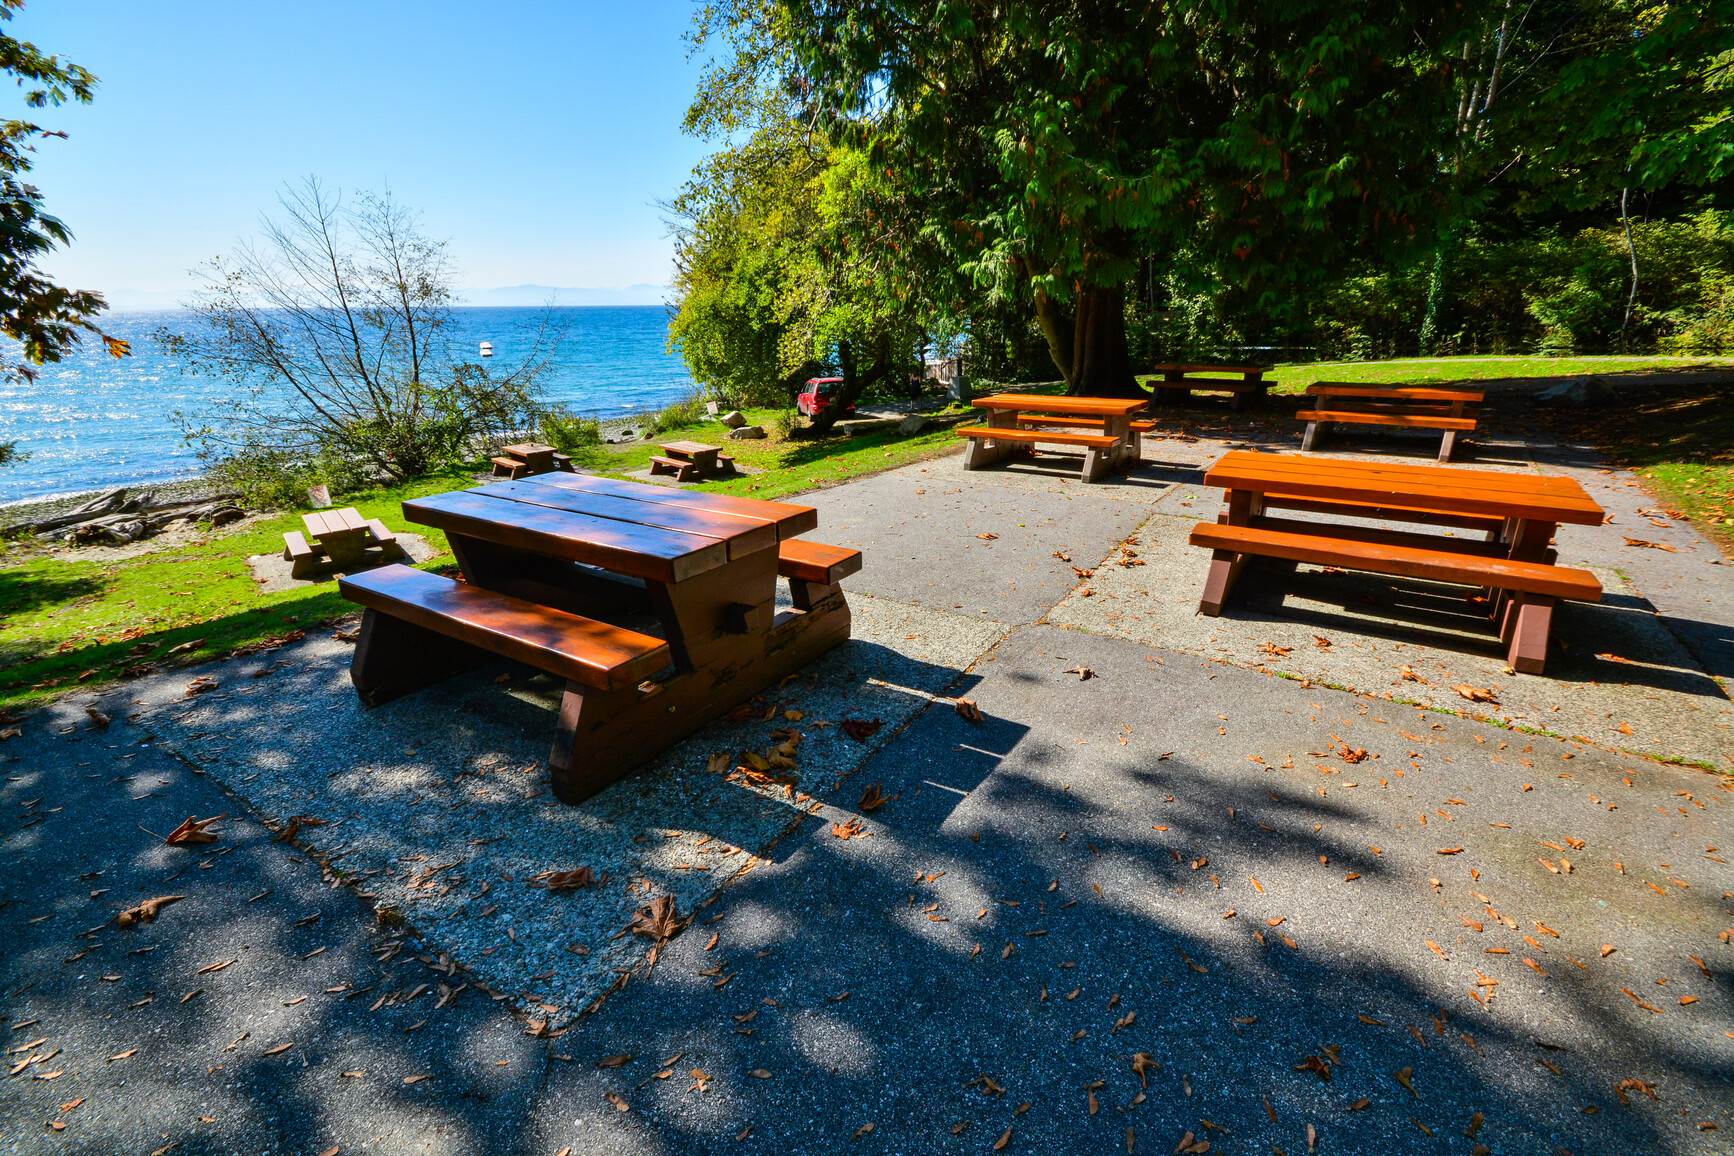 Day-use picnic area with many picnic tables on a concrete pad surrounded by grass and trees. Overlooking the beach and ocean with mountains in the distance.